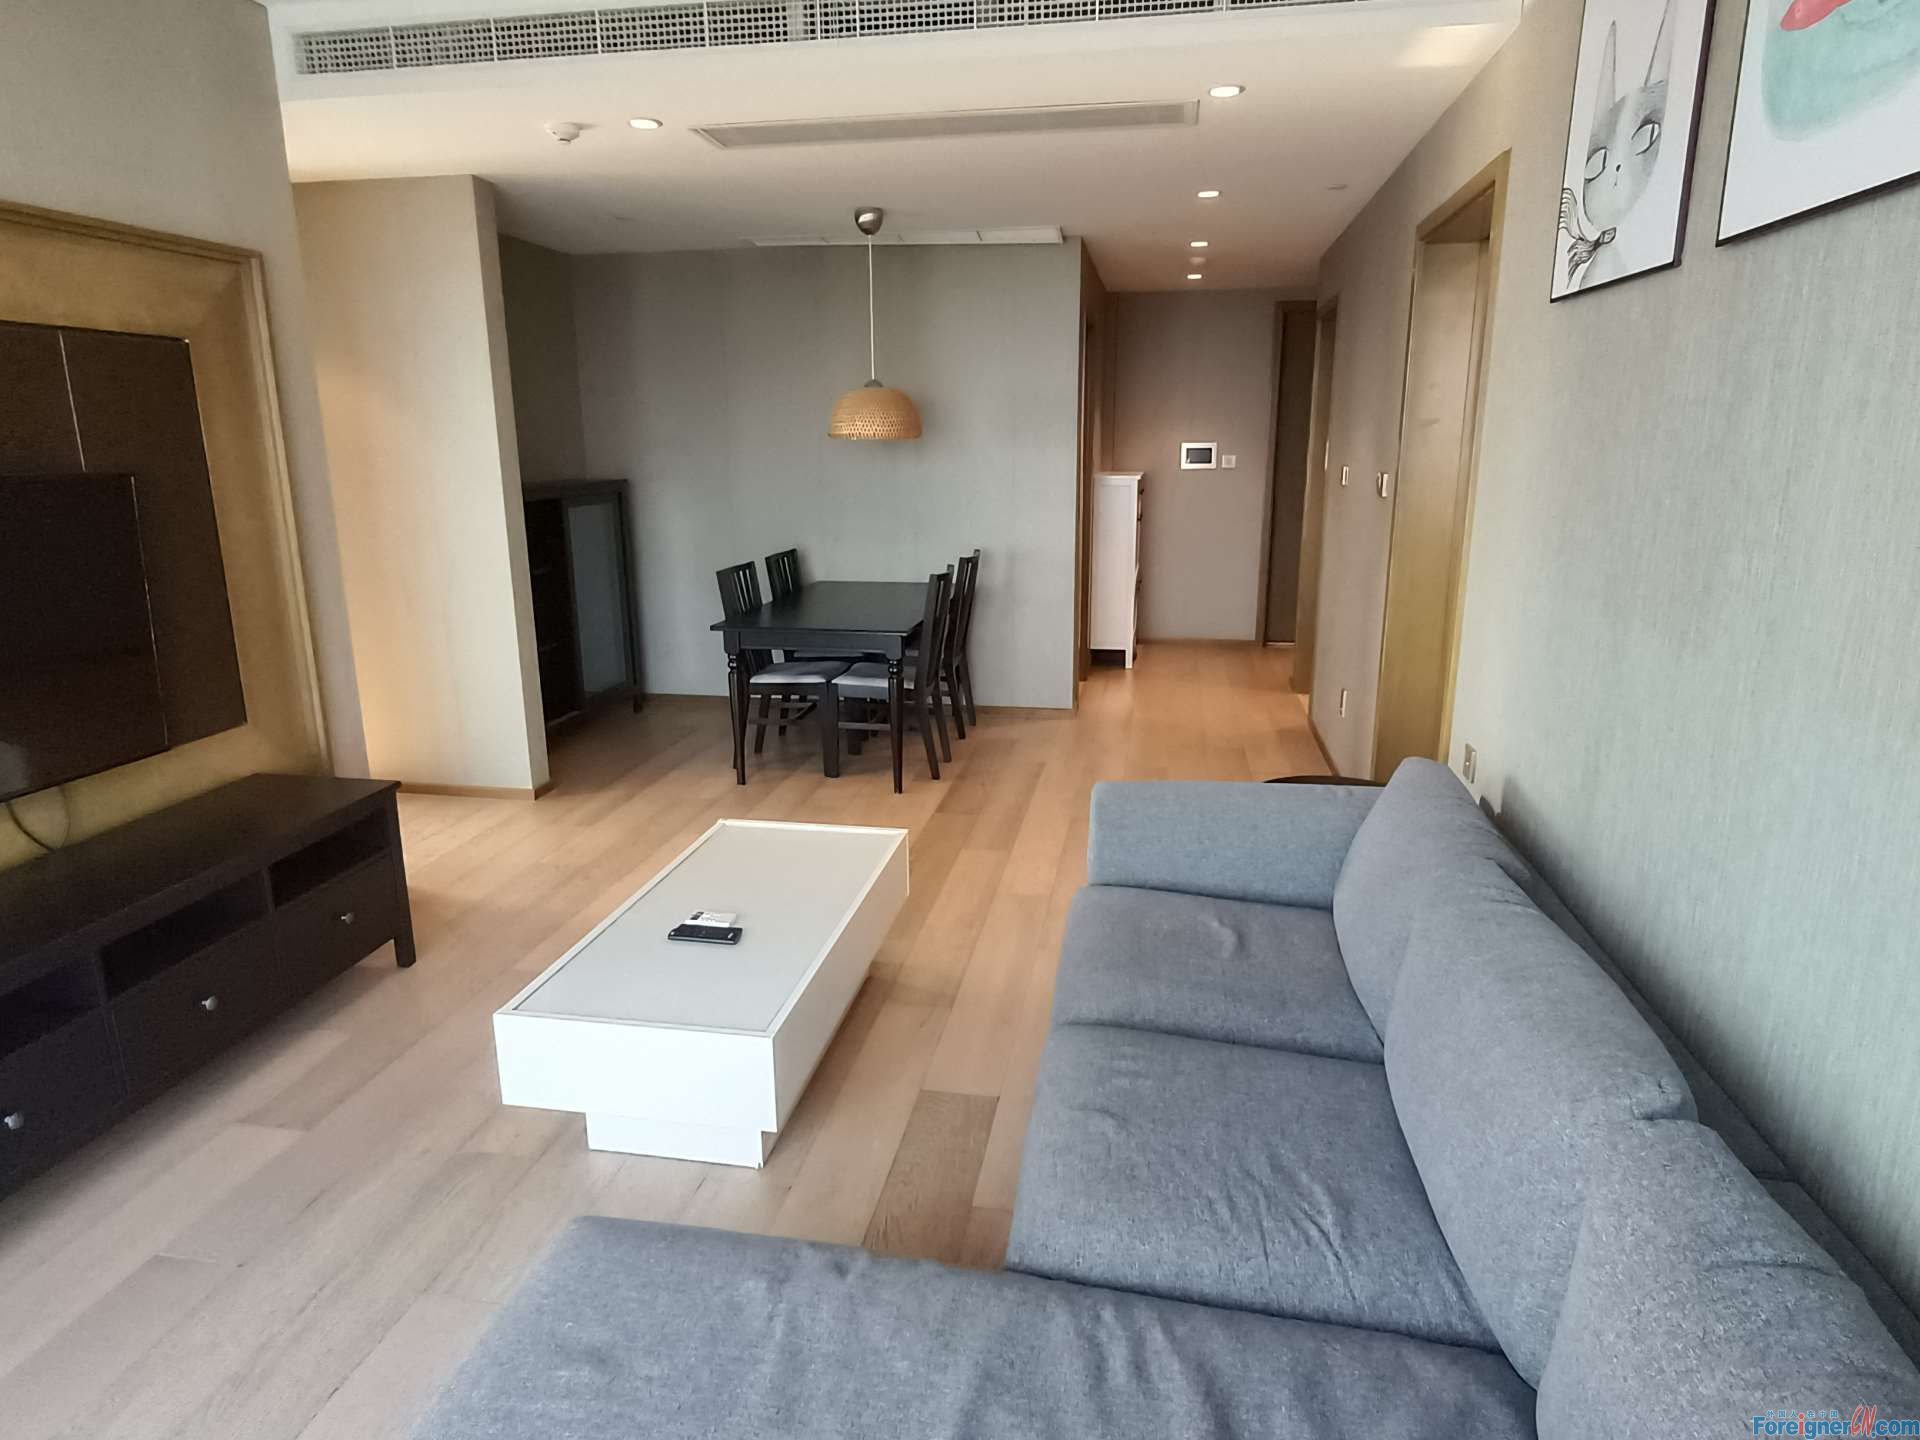 Wonderful ! ! House to rent in suzhou for expats / 2 bedrooms and1 bathroom/modern and clean/close to Jinji lake /In SIP Suzhou 